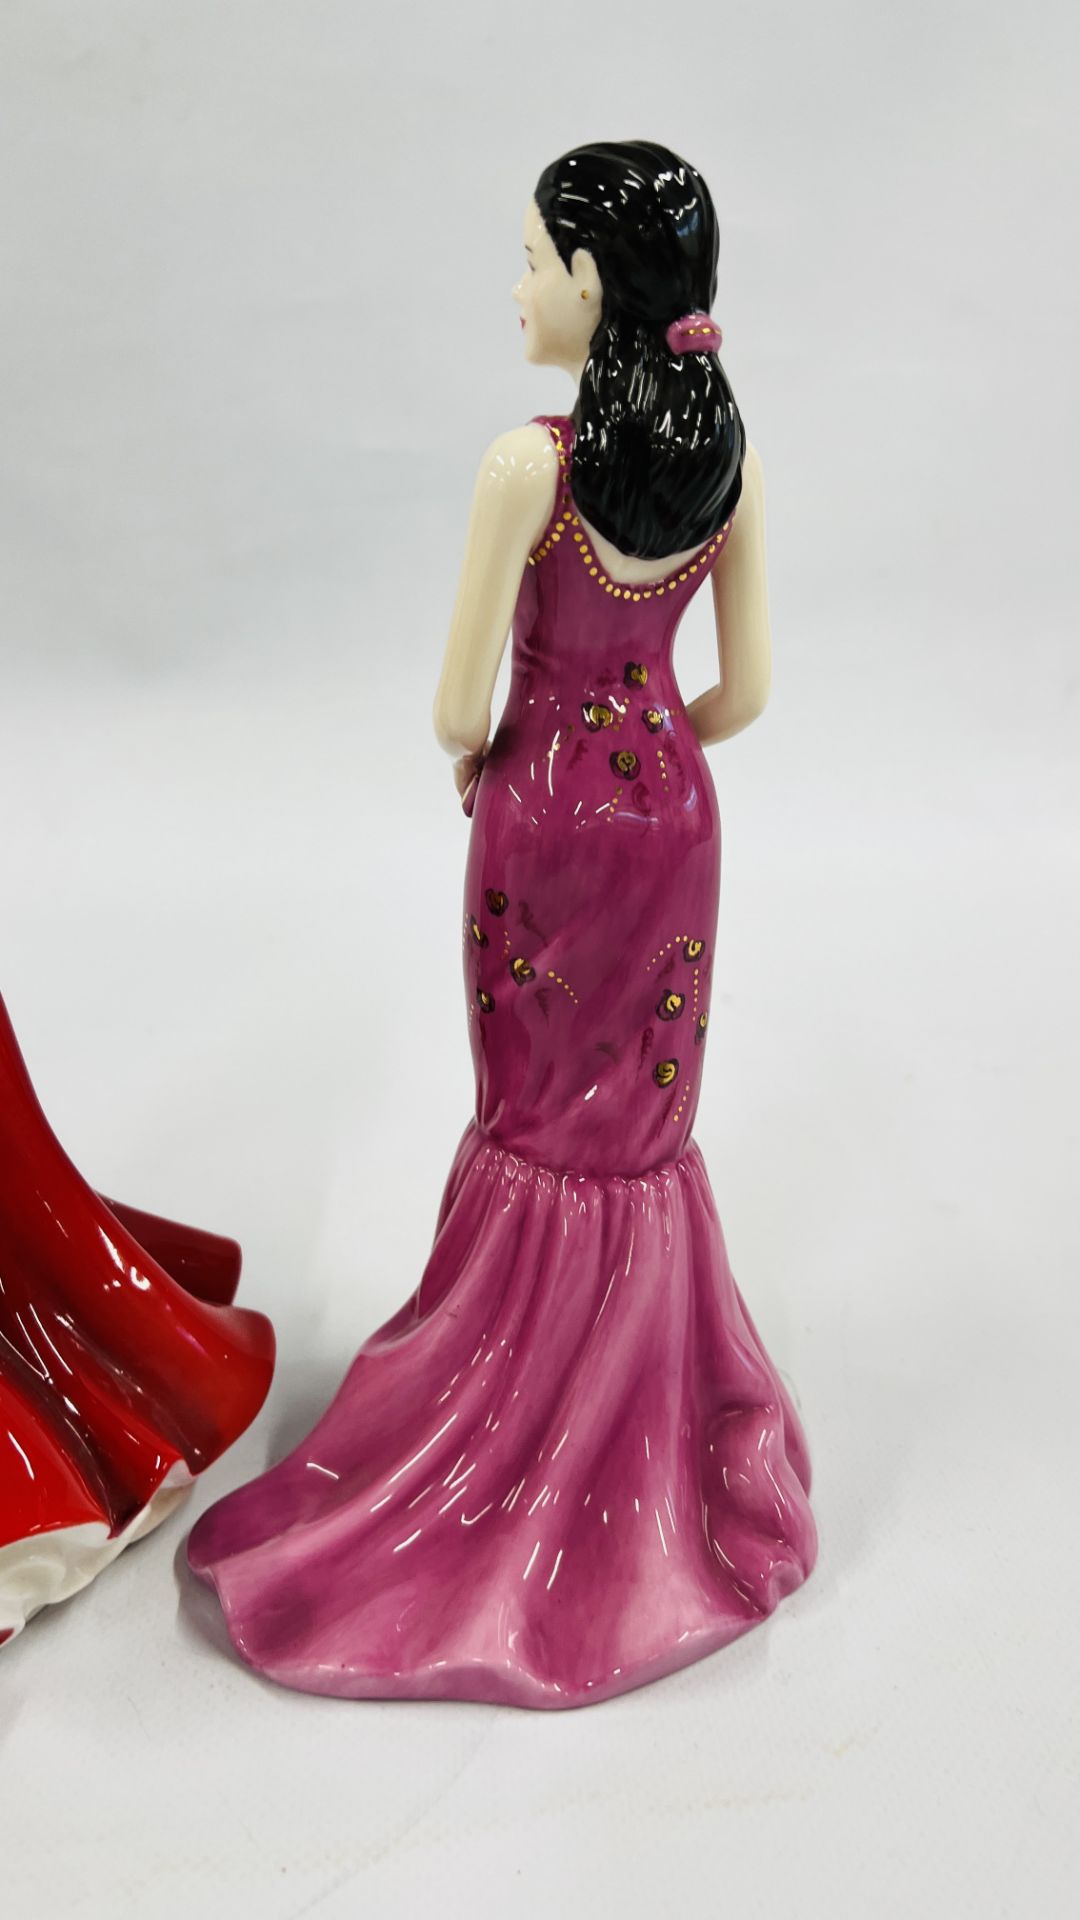 3 ROYAL DOULTON CABINET COLLECTORS FIGURINES TO INCLUDE "NATALIE" HN 5012, LIMITED EDITION 1419/15, - Image 7 of 10